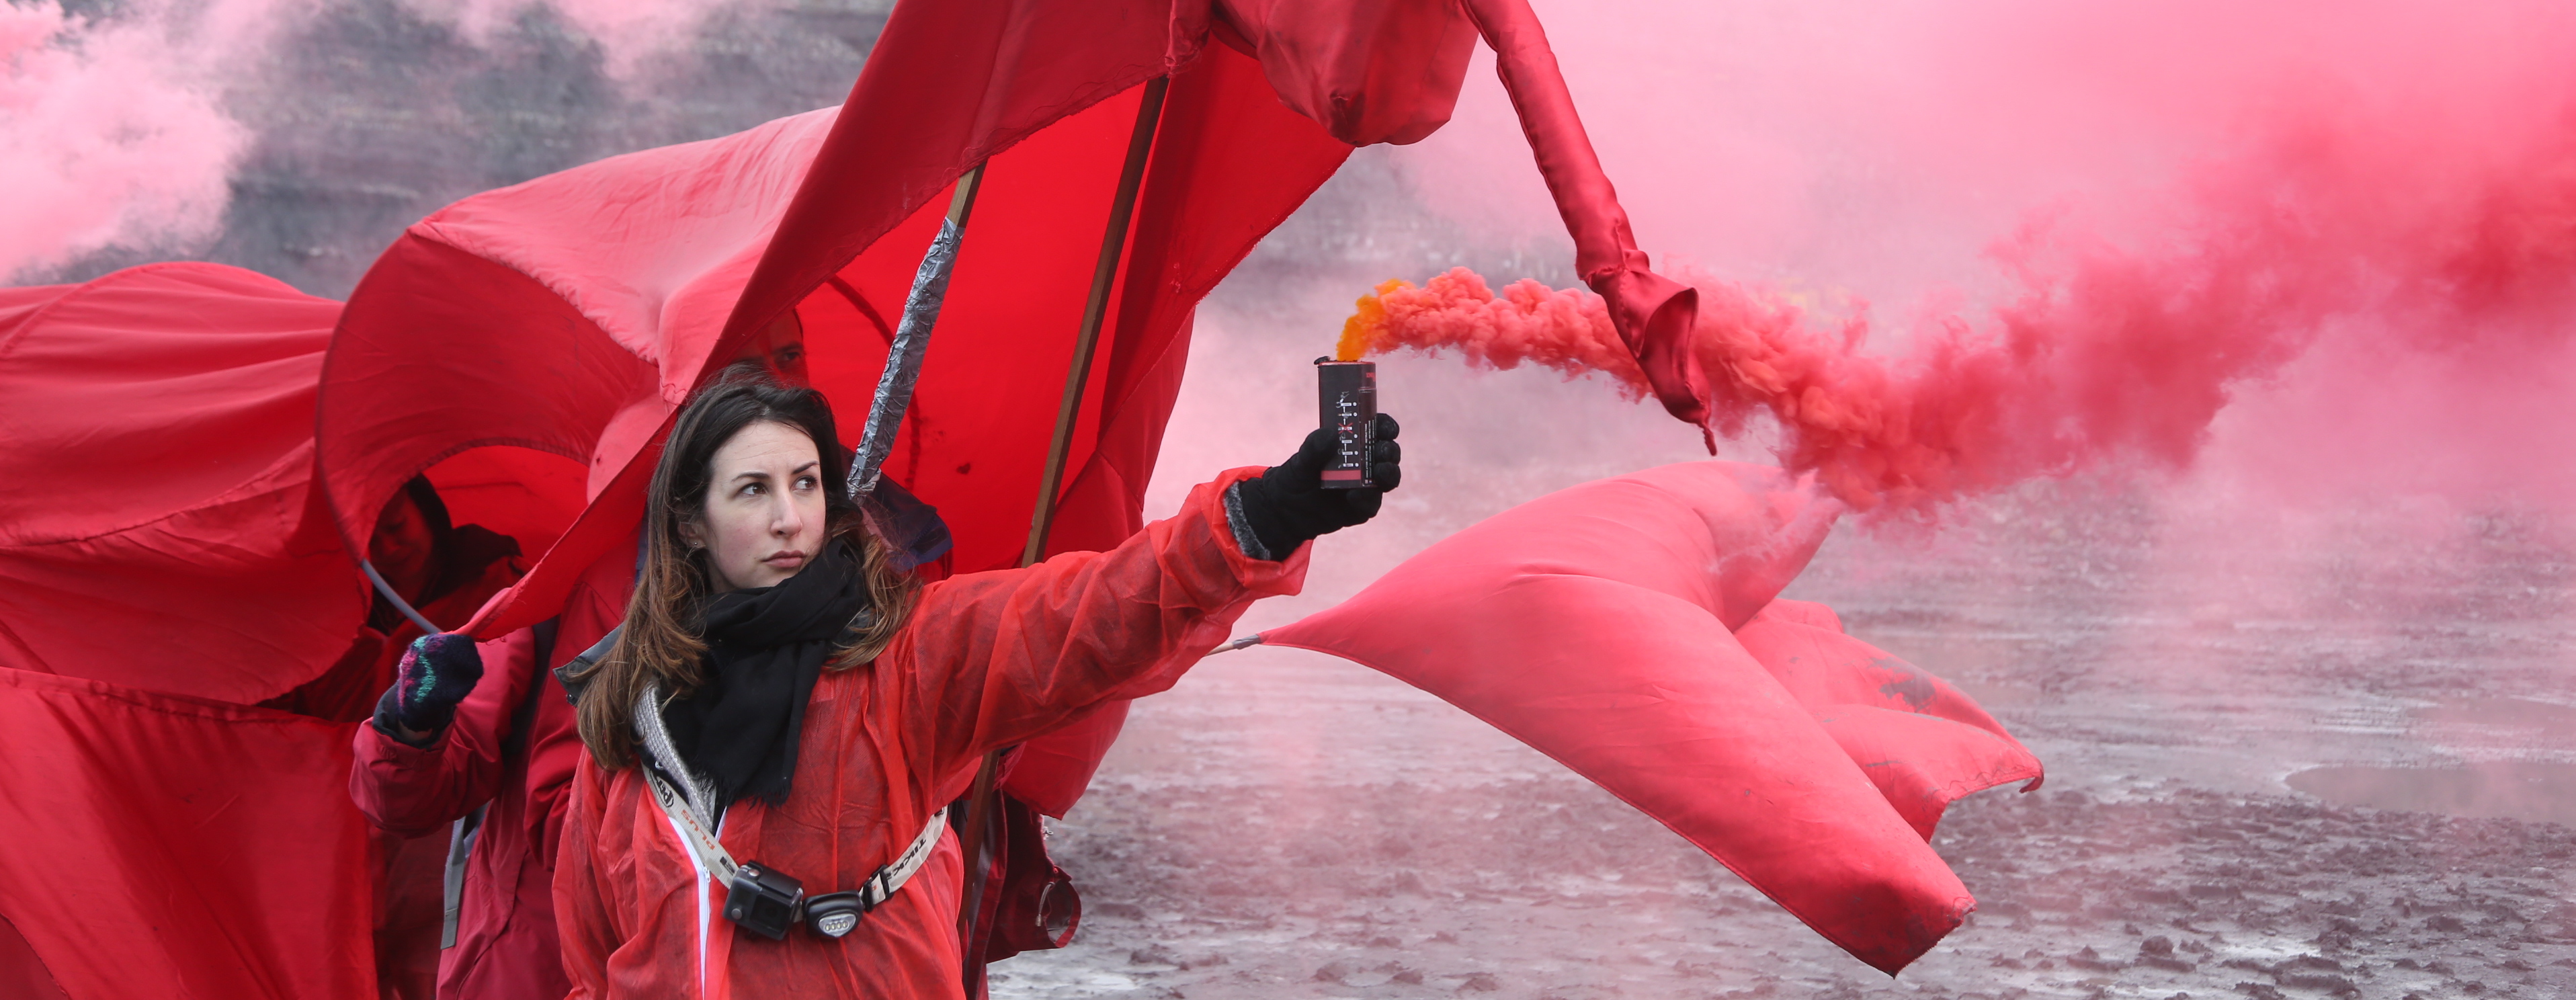 A woman dressed in red looses a canister of red smoke.